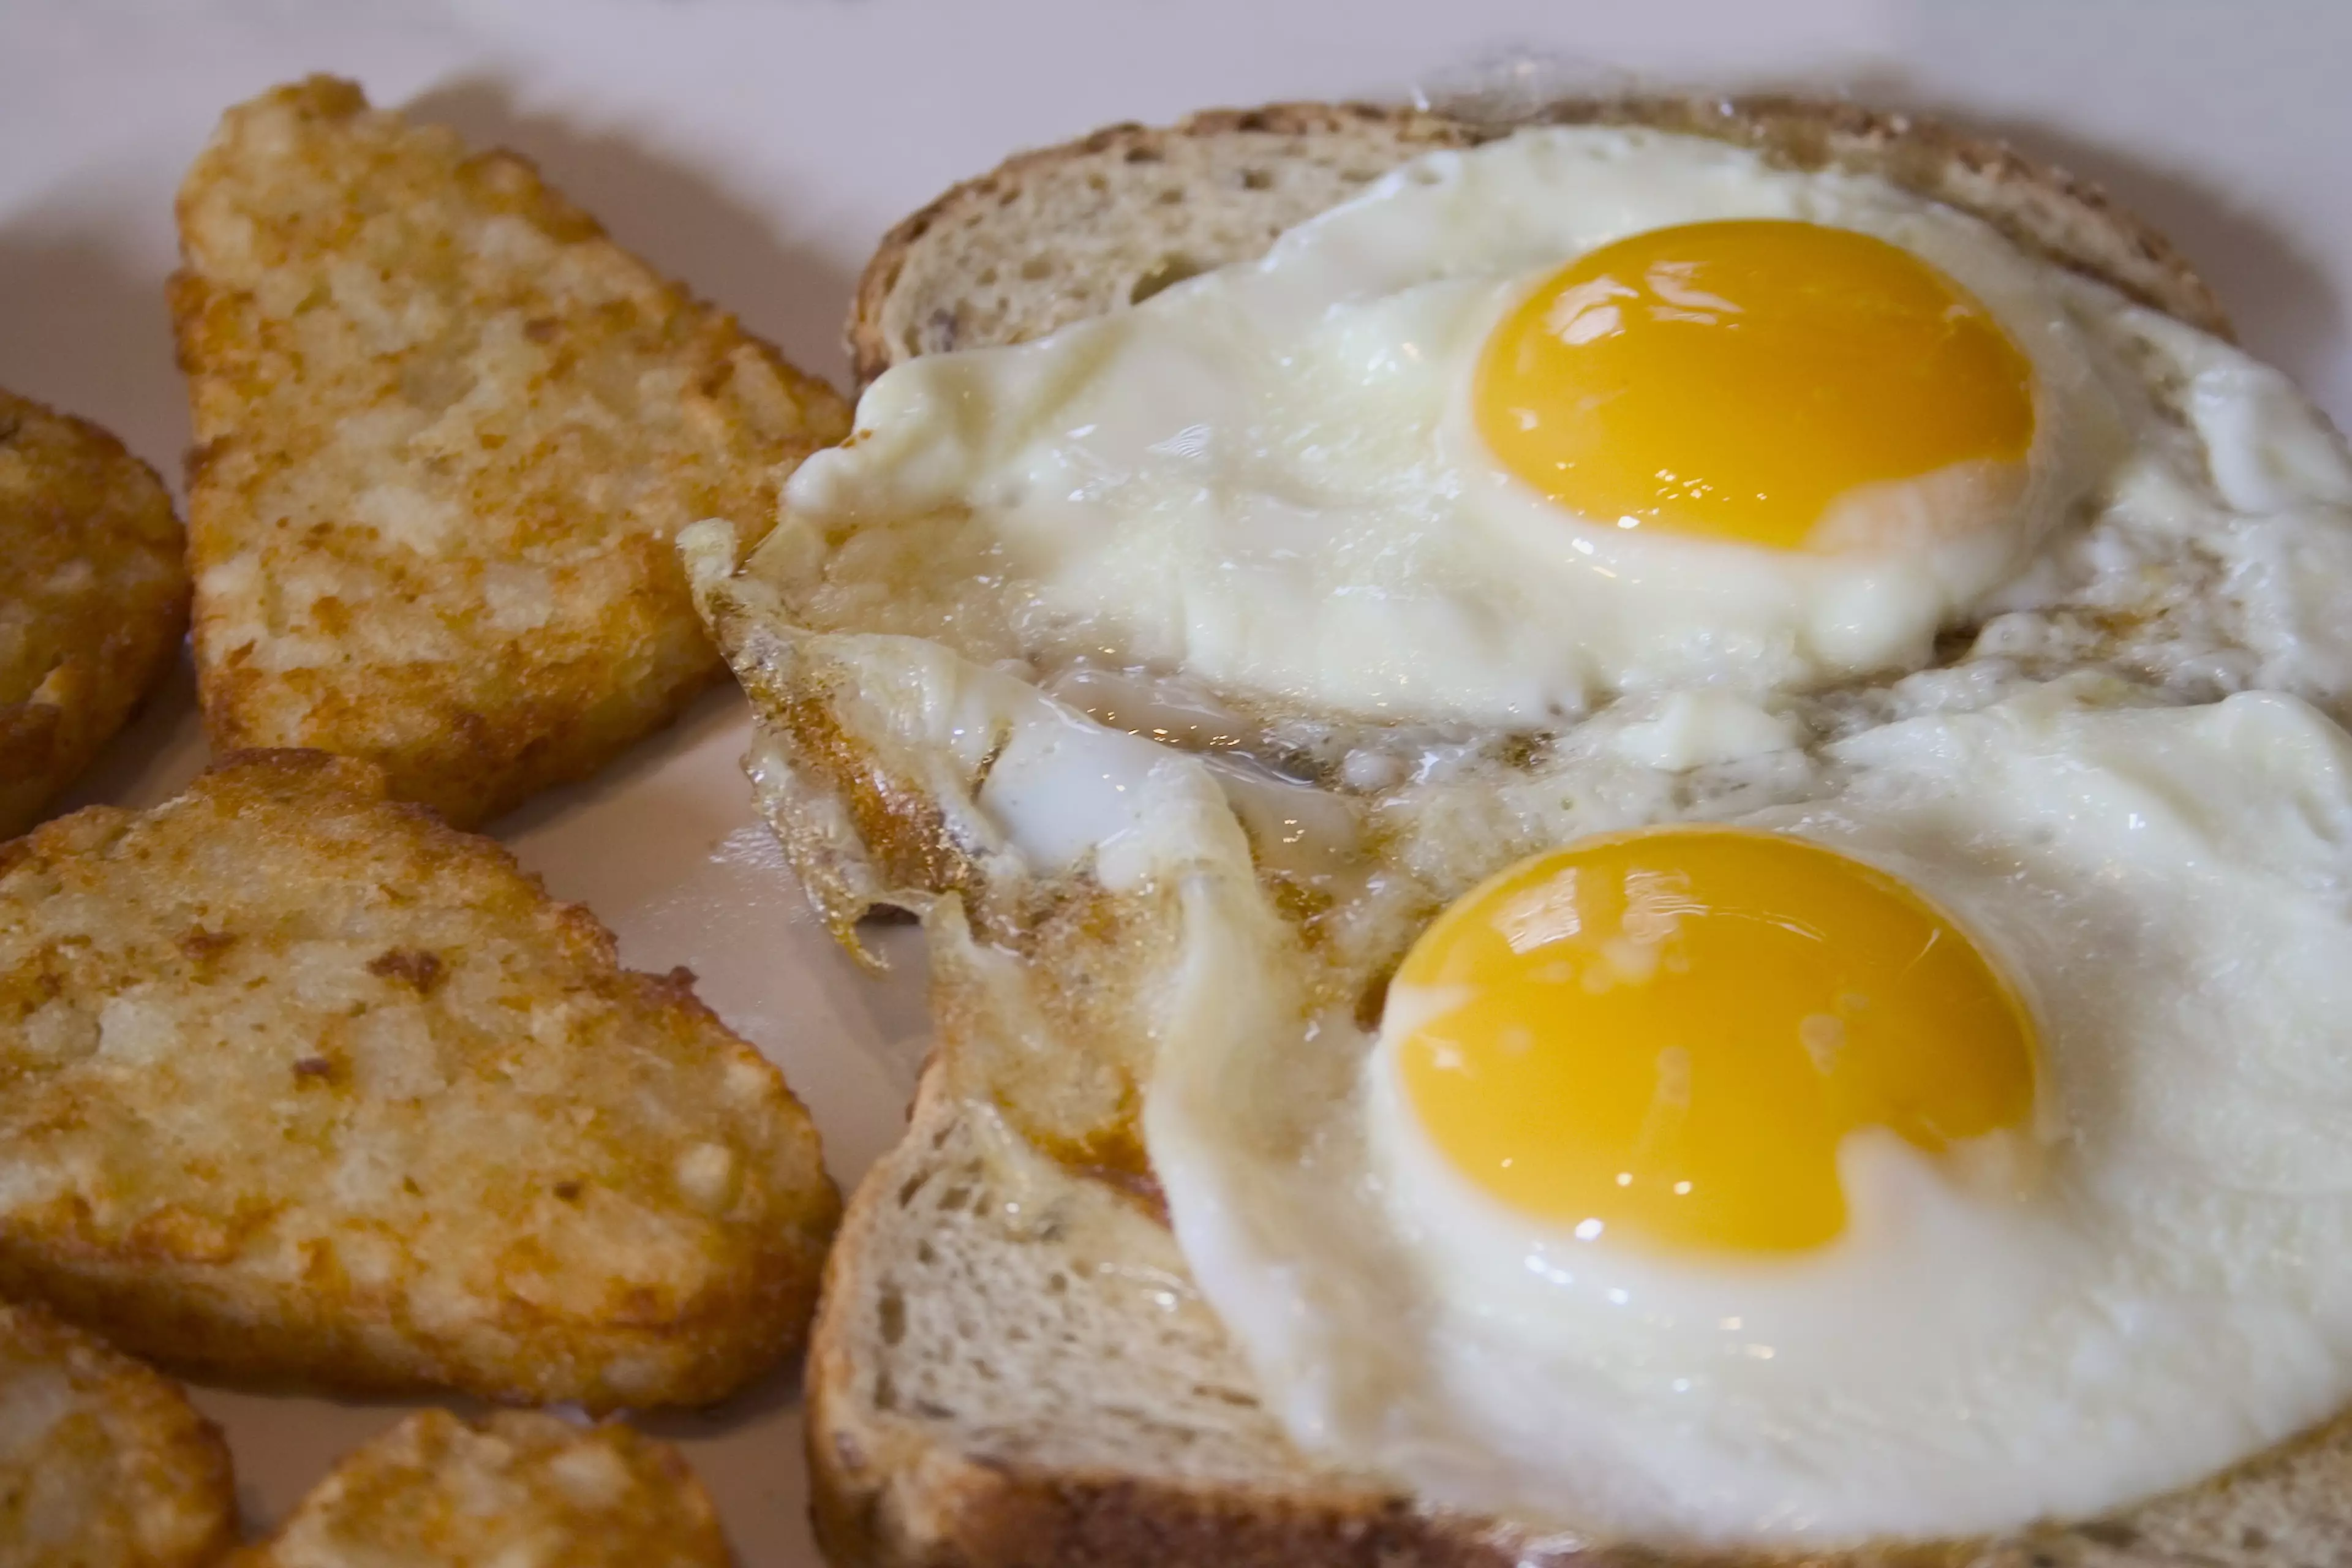 A vegan blogger has claimed eating eggs is worse for you than smoking.